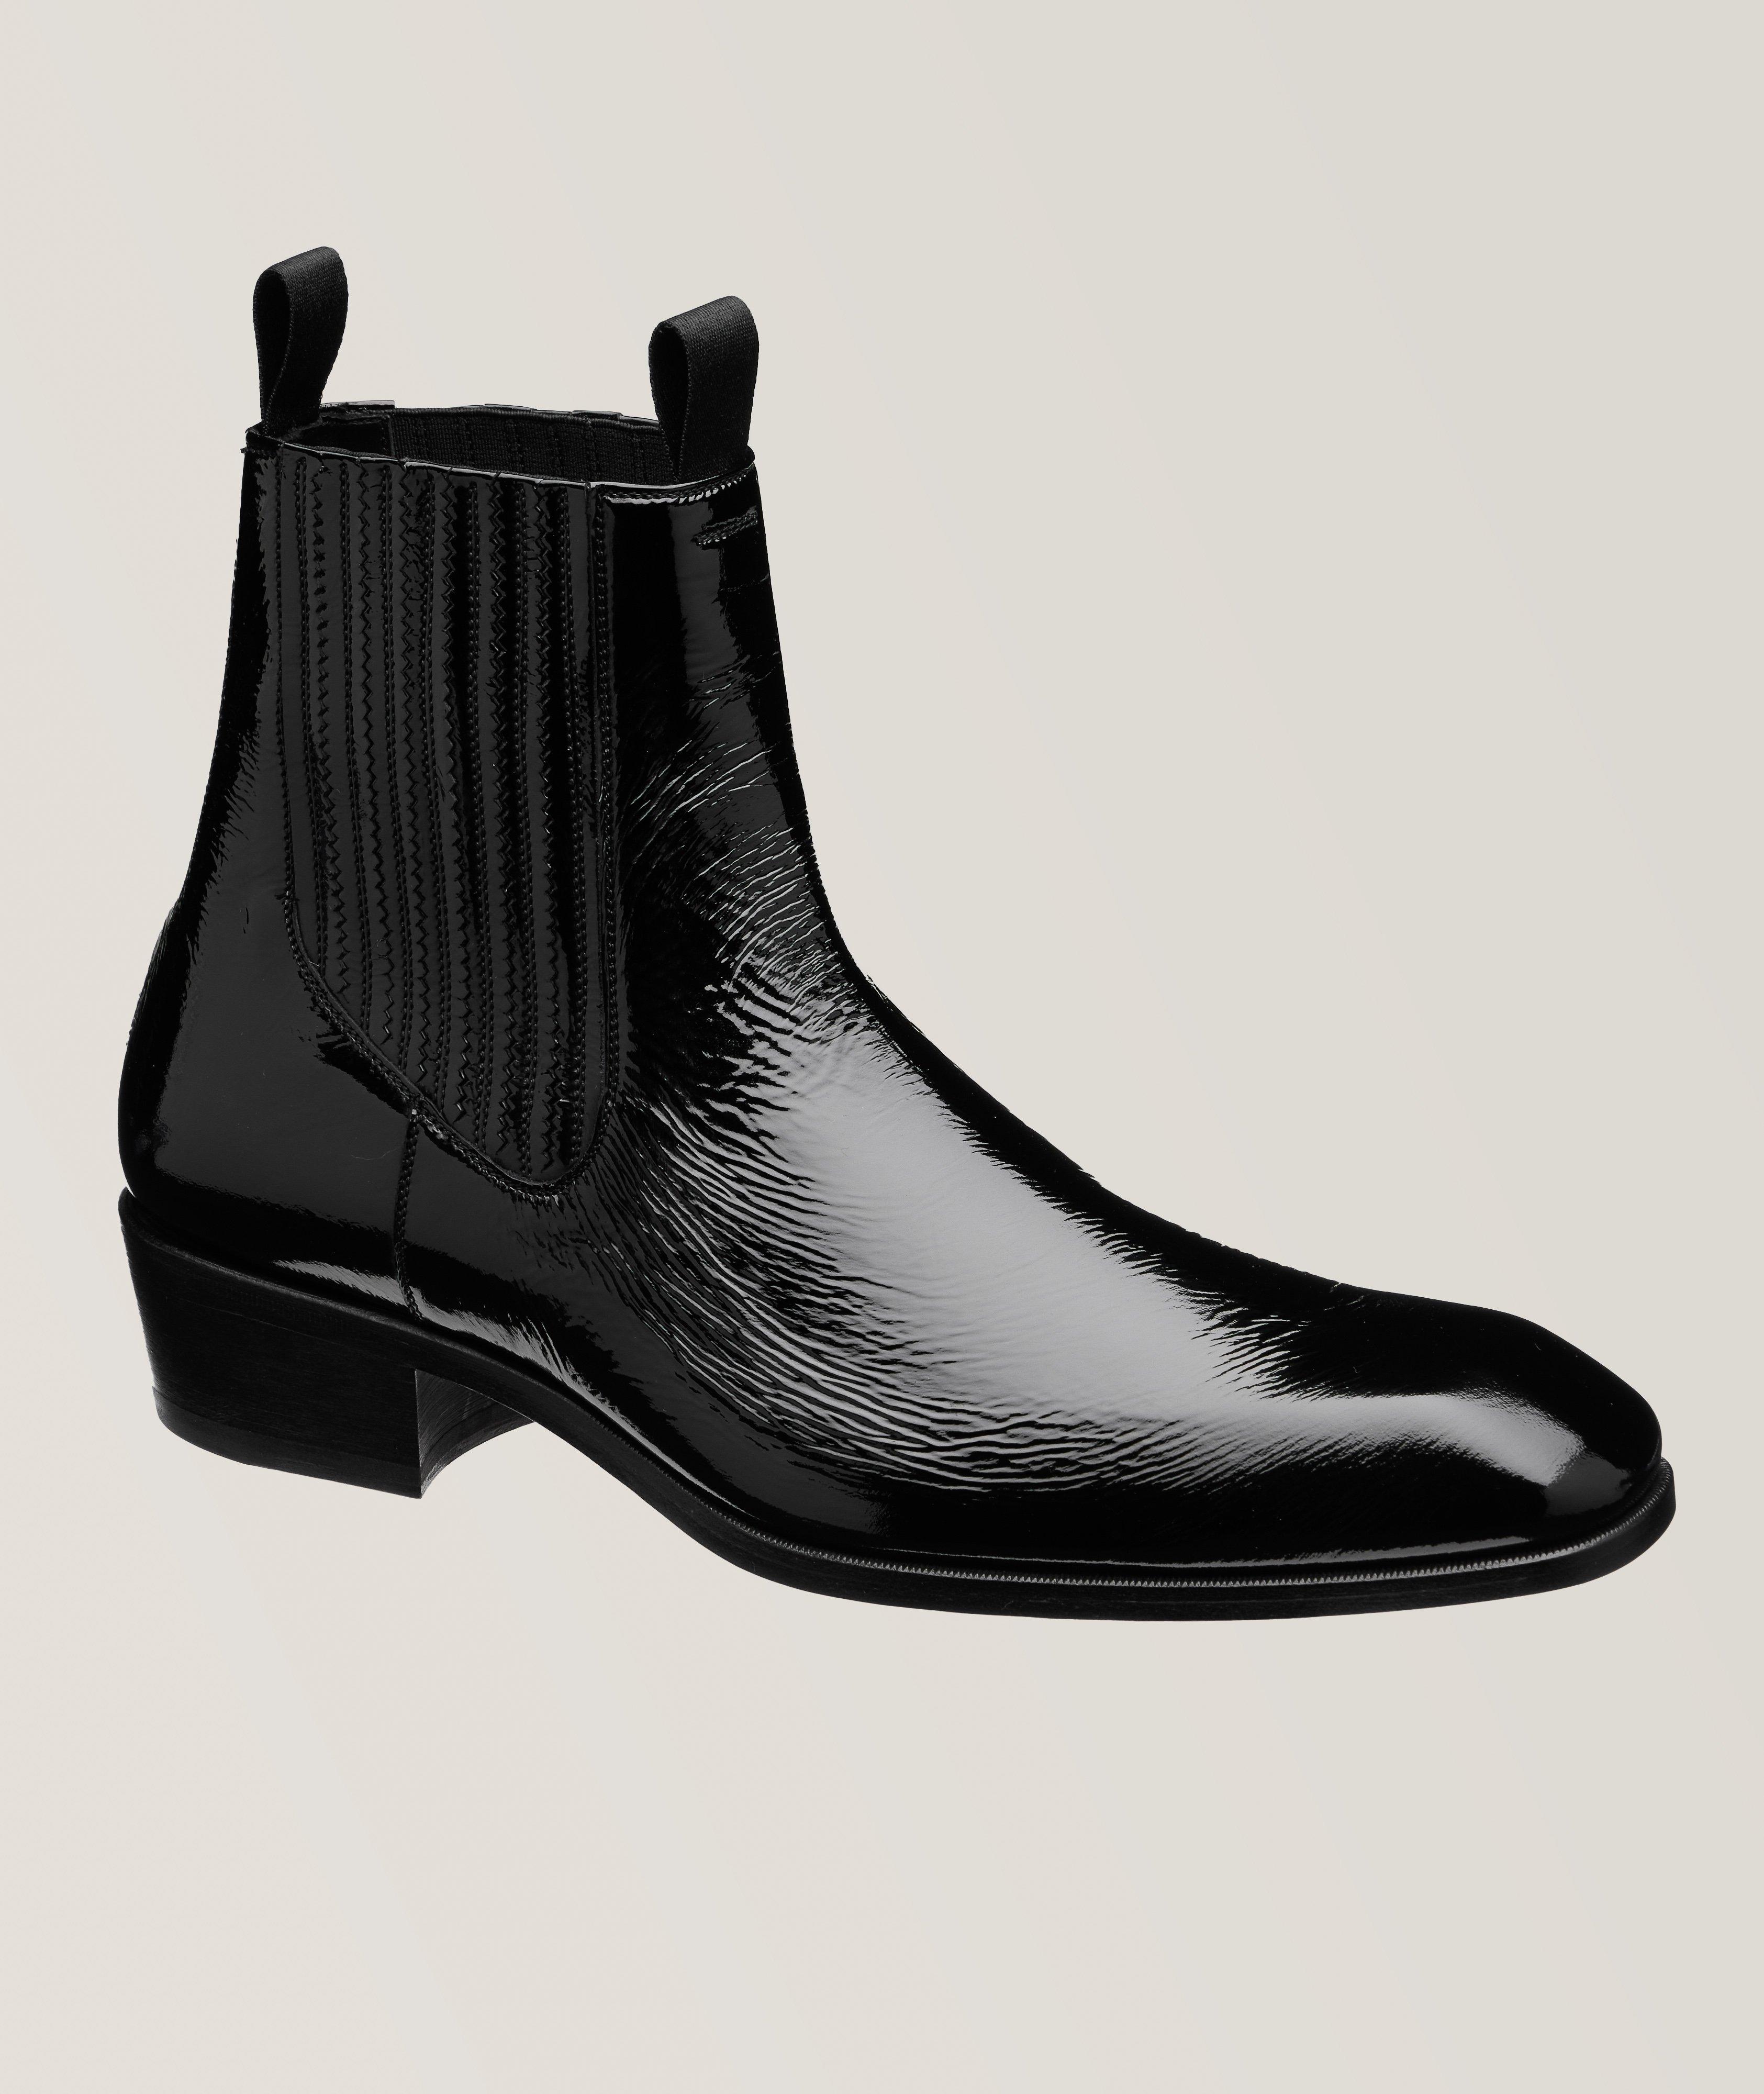 TOM FORD Calfskin Leather Chelsea Boots